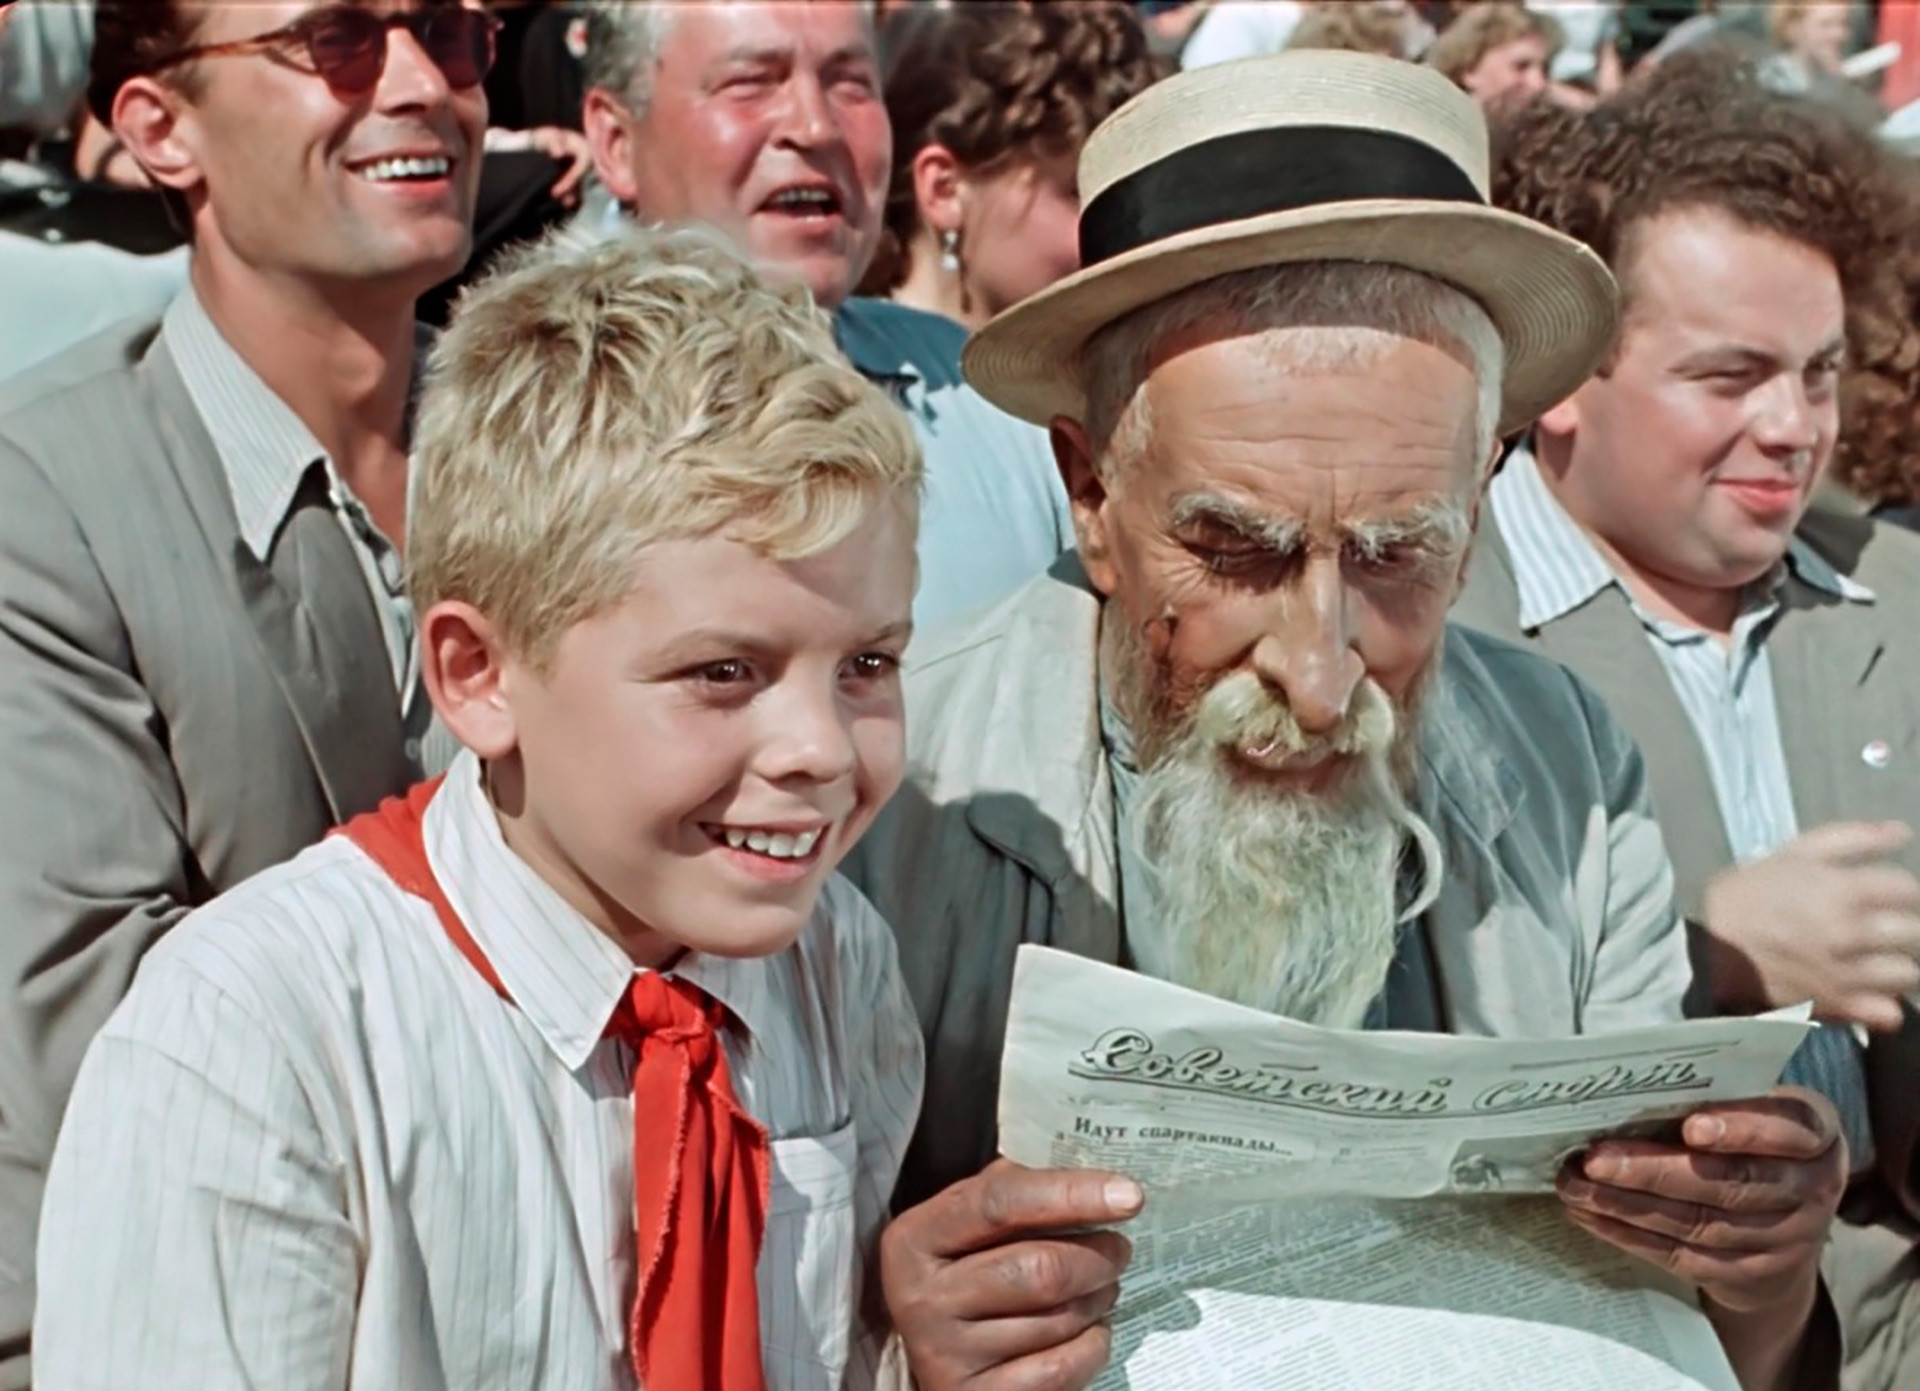 Hottabych and Volka during a football match: A screenshot from a Soviet movie